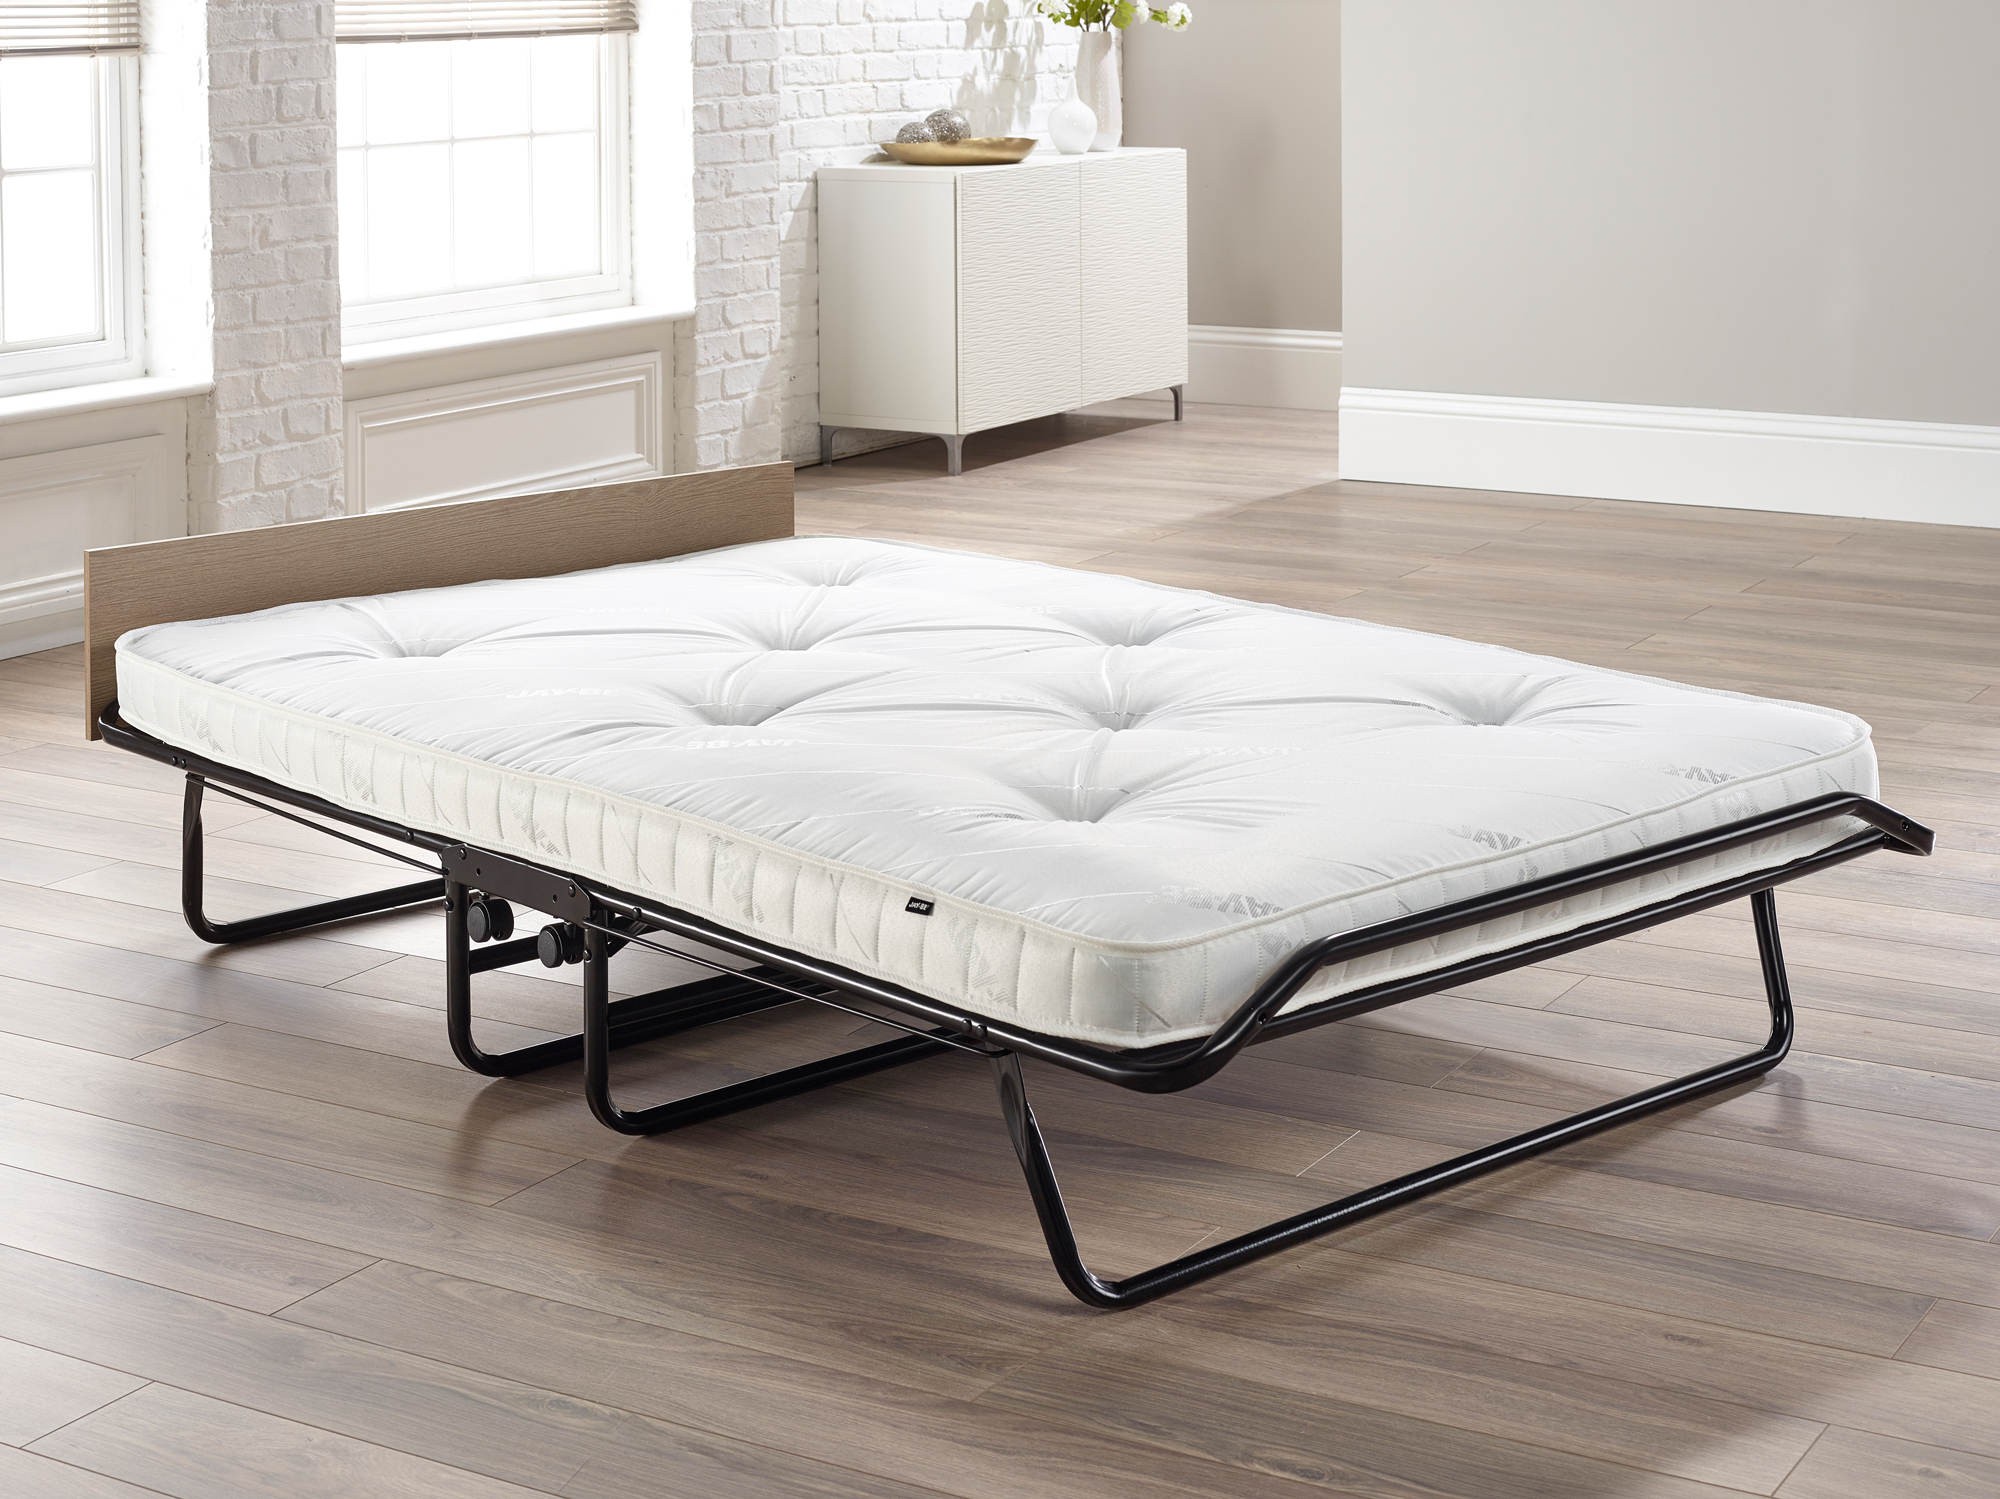 rollaway beds with mattress for sale